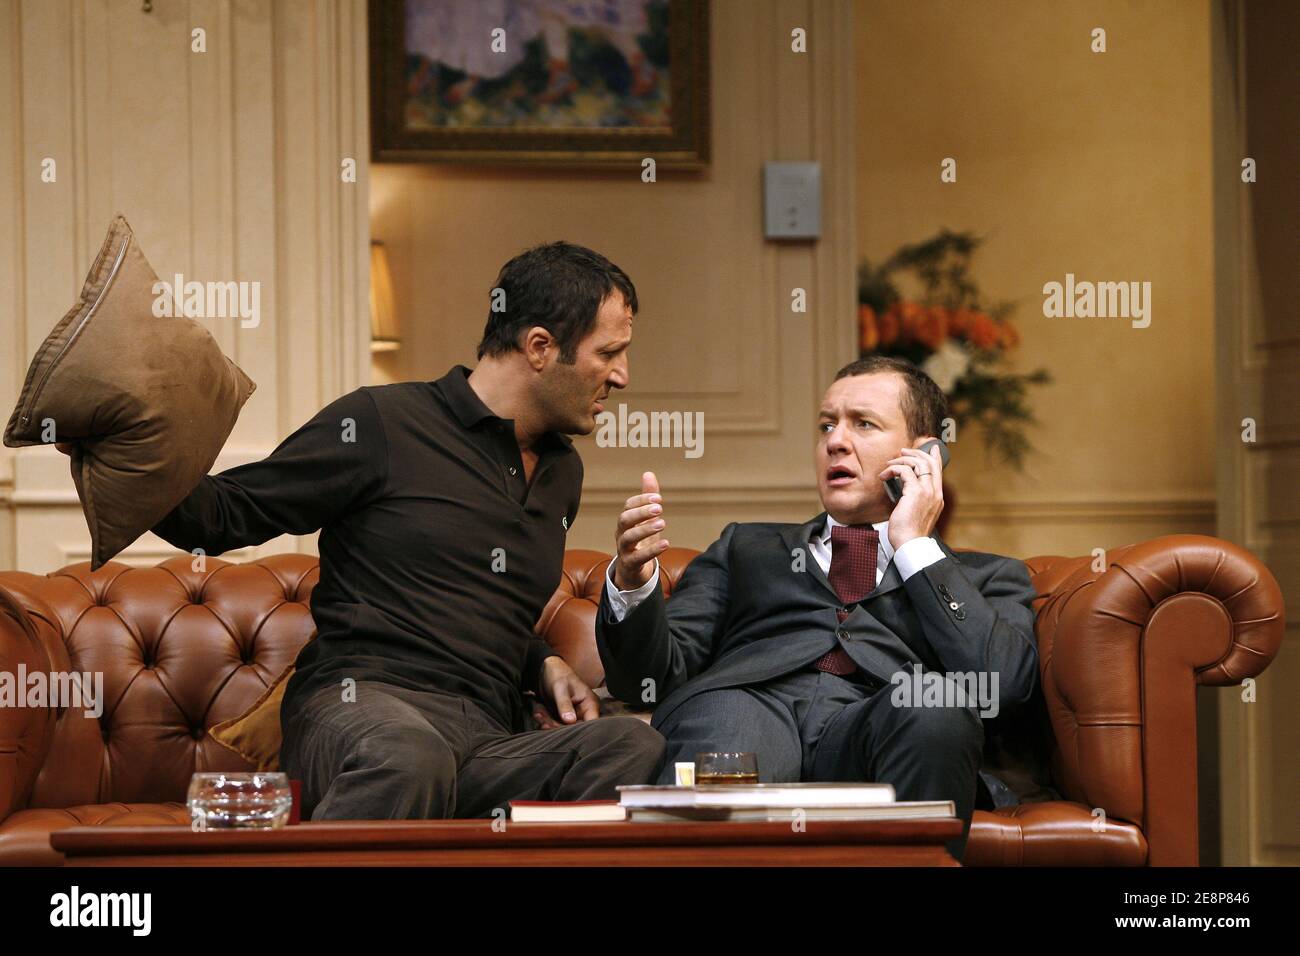 French actors Dany Boon and Arthur during the run-through of the play 'Le Diner de Cons', staged by Francis Veber at the Theatre de la Porte Saint-Martin in Paris, France on September 19, 2007. Also starring in the play: Laurent Gamelon, Stephane Bierry, Jessica Borio, Olivier Granier and Juliette Meyniac. Photo by Thierry Orban/ABACAPRESS.COM Stock Photo